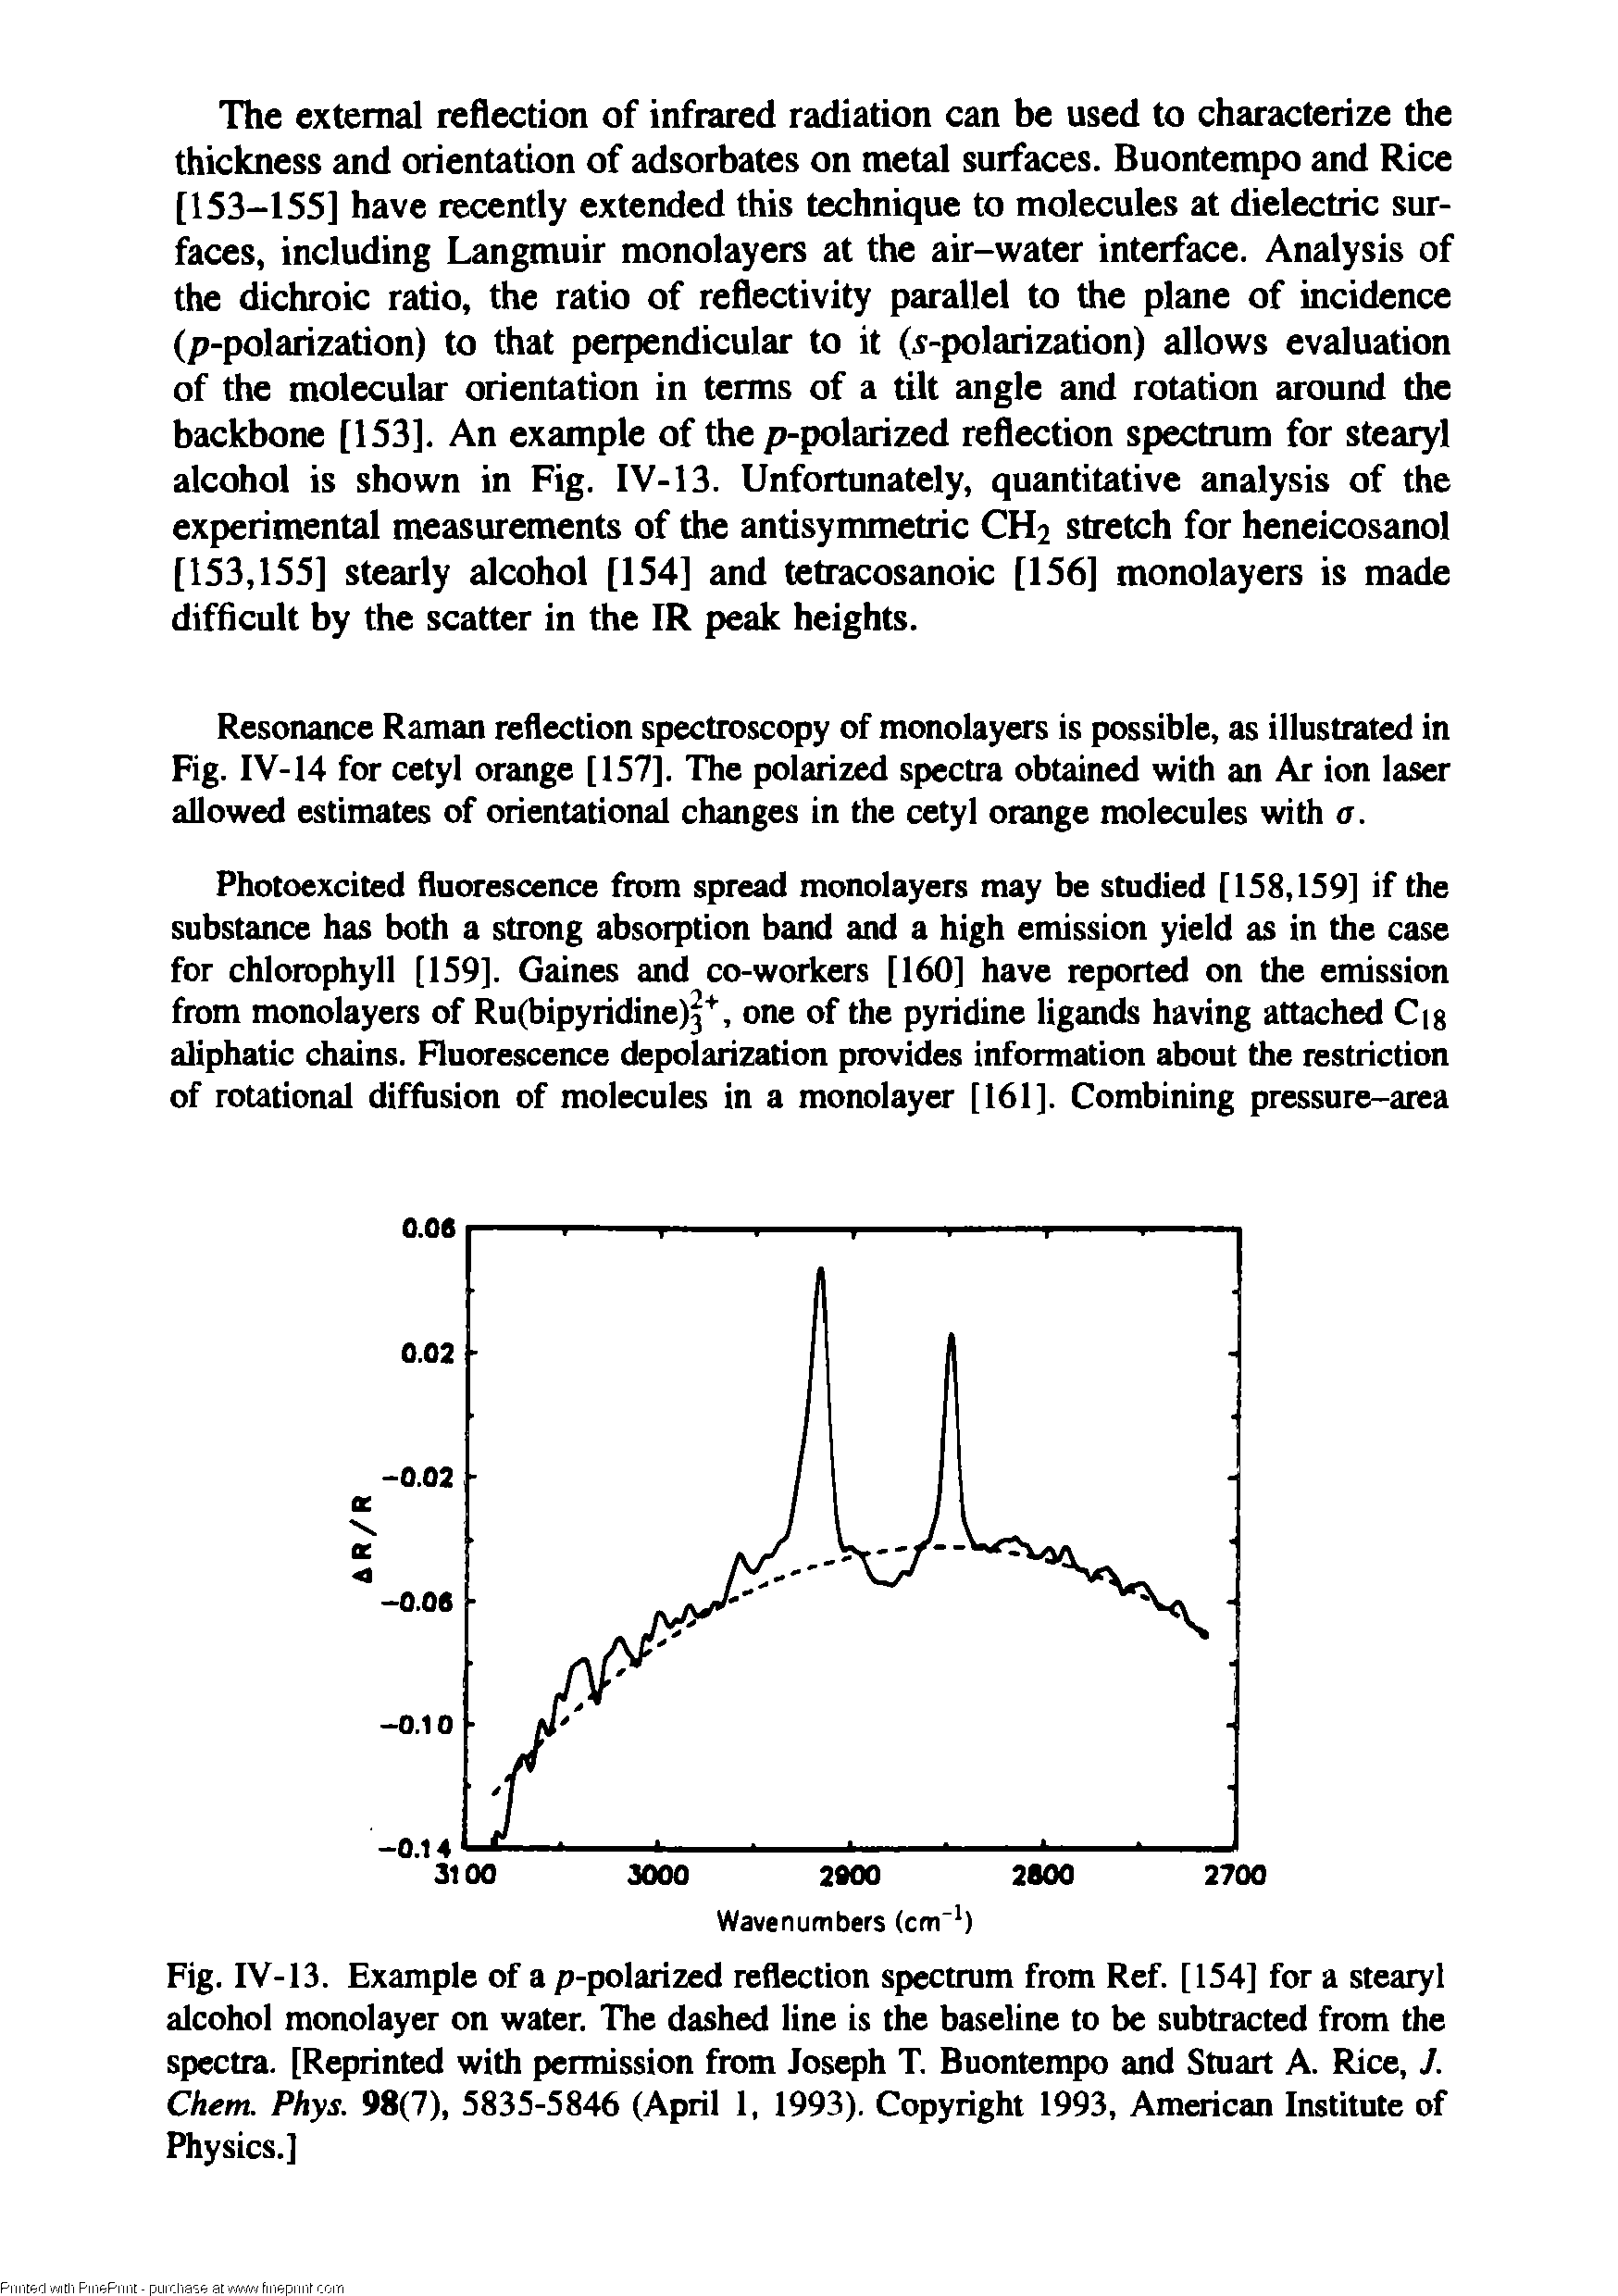 Fig. IV-13. Example of a p-polarized reflection spectrum from Ref. [154] for a stearyl alcohol monolayer on water. The dashed line is the baseline to be subtracted from the spectra. [Reprinted with permission from Joseph T. Buontempo and Stuart A. Rice, J. Chem. Phys. 98(7), 5835-5846 (April 1, 1993). Copyright 1993, American Institute of Physics.]...